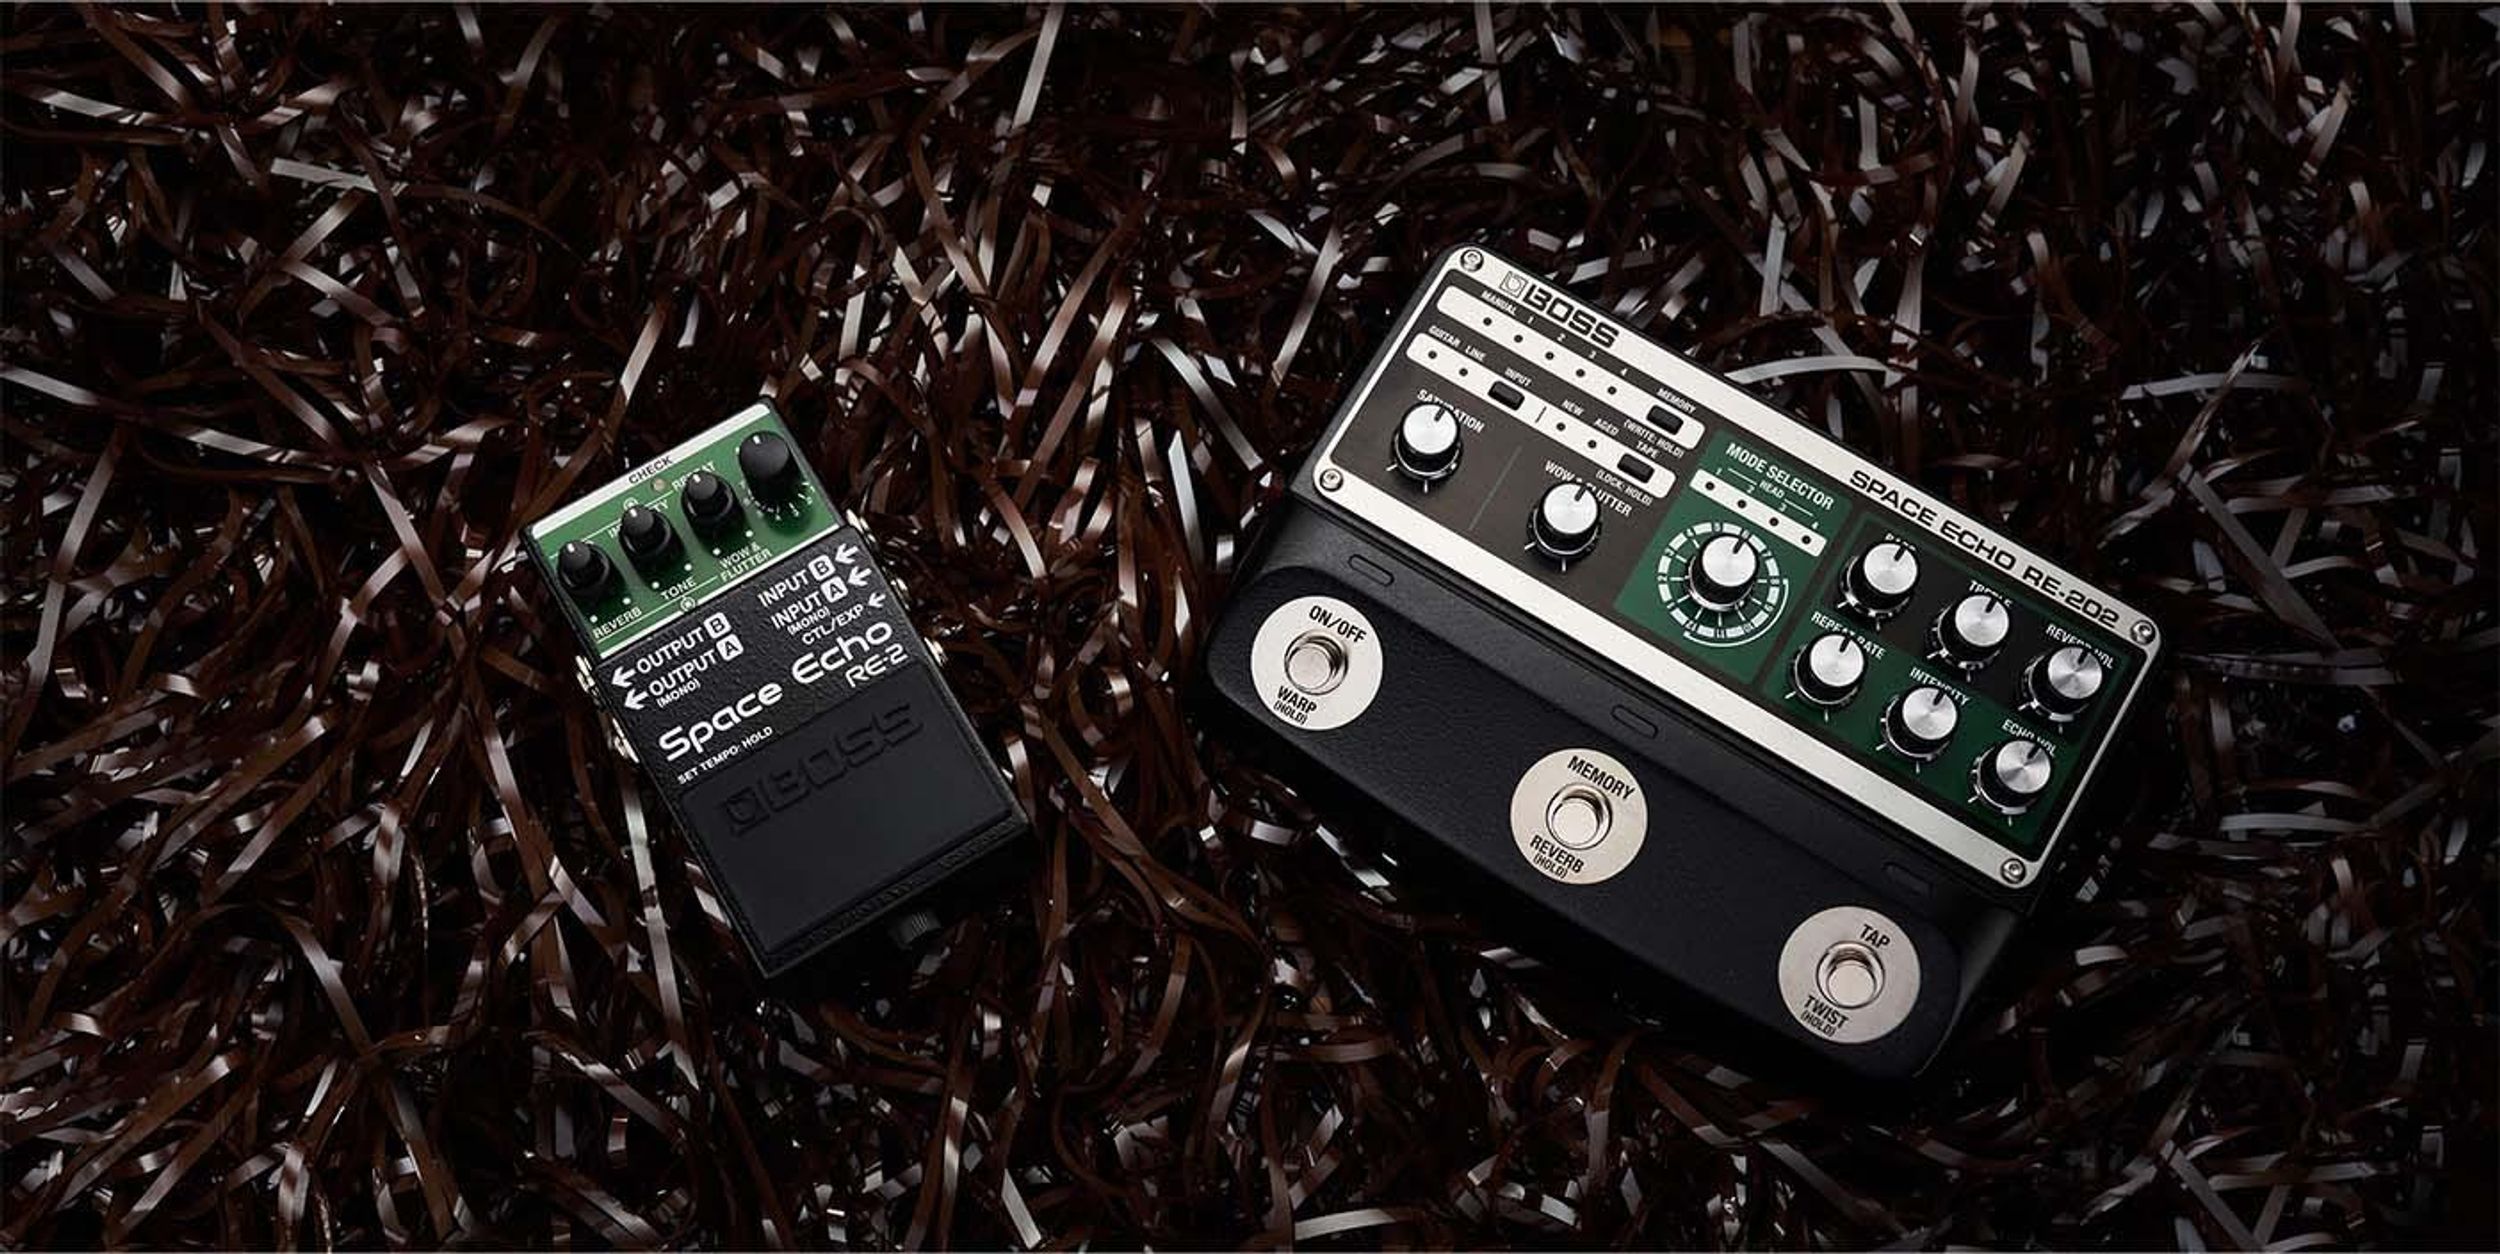 Boss Introduces the RE-202 and RE-2 Space Echo Pedals